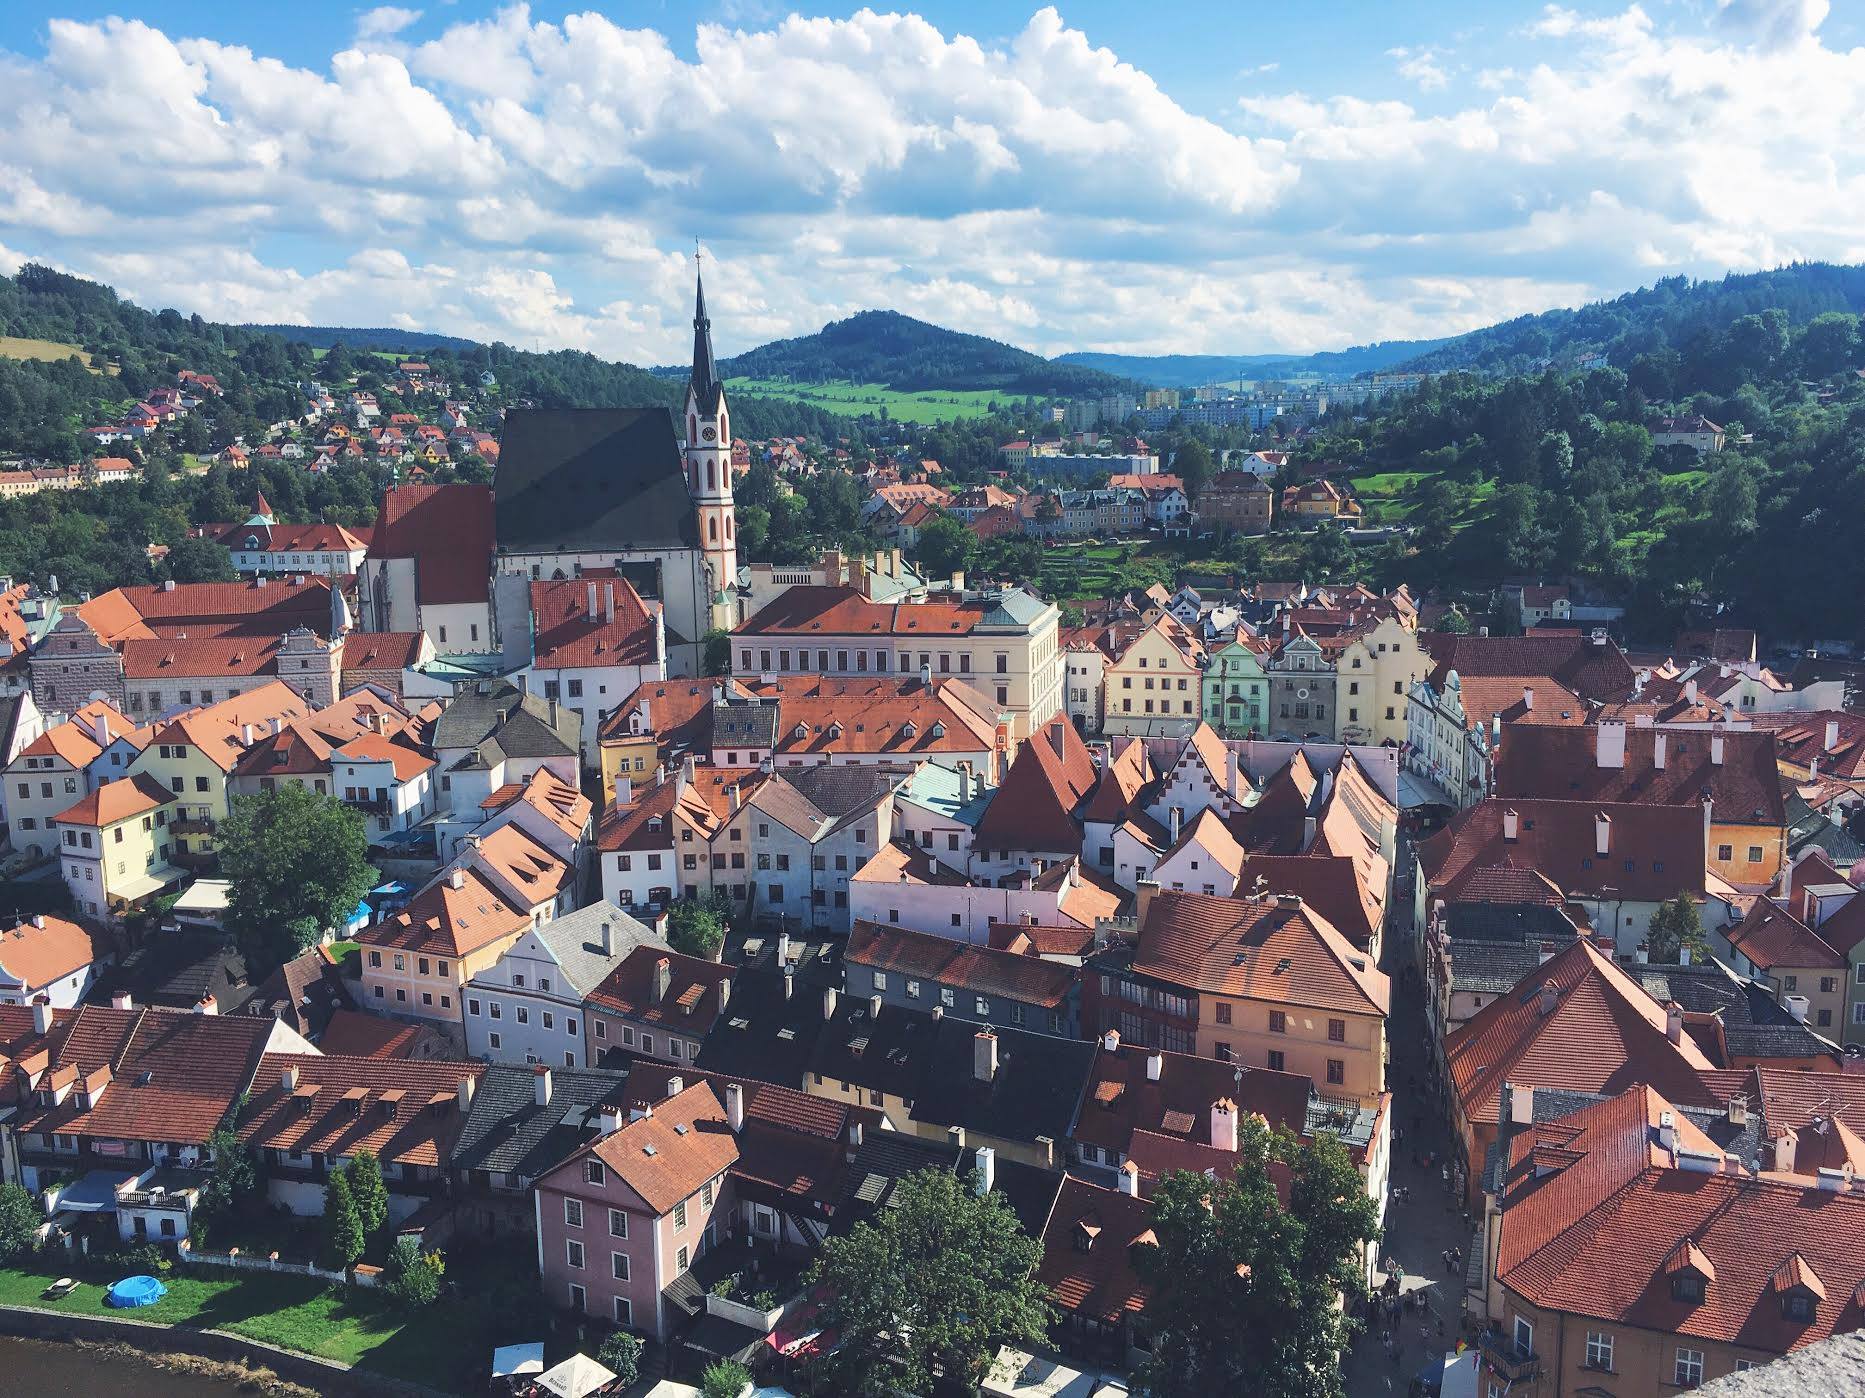 Rebecca Oswald, Czech Republic: "Marveling at this fantasy view in rural Czech Republic."